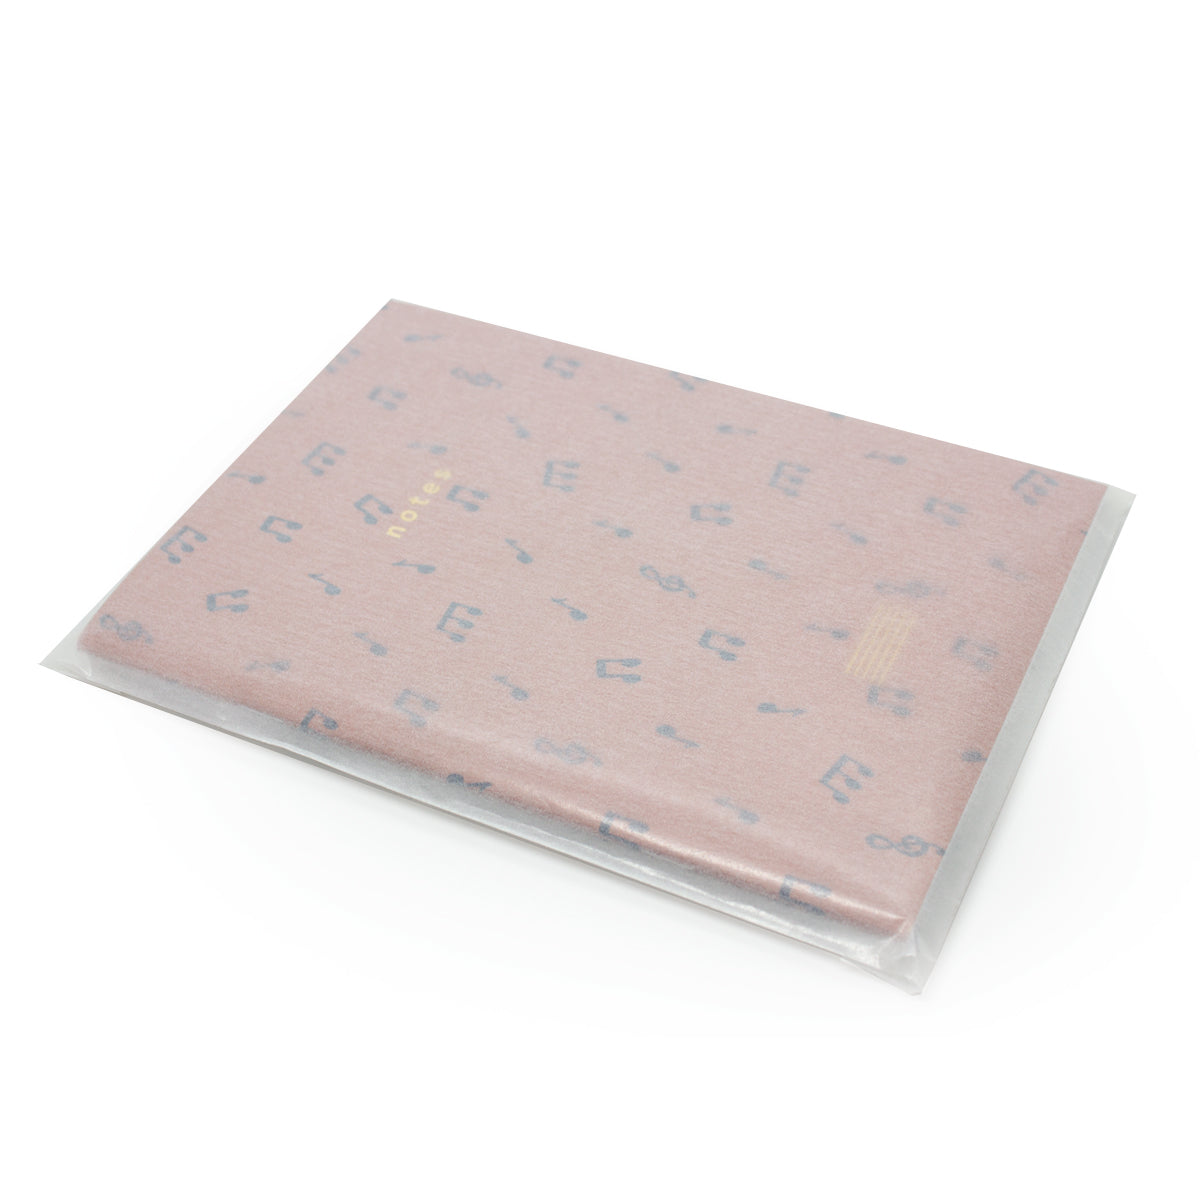 Notes Notebook Set of 2 - Dot Grid & Ruled